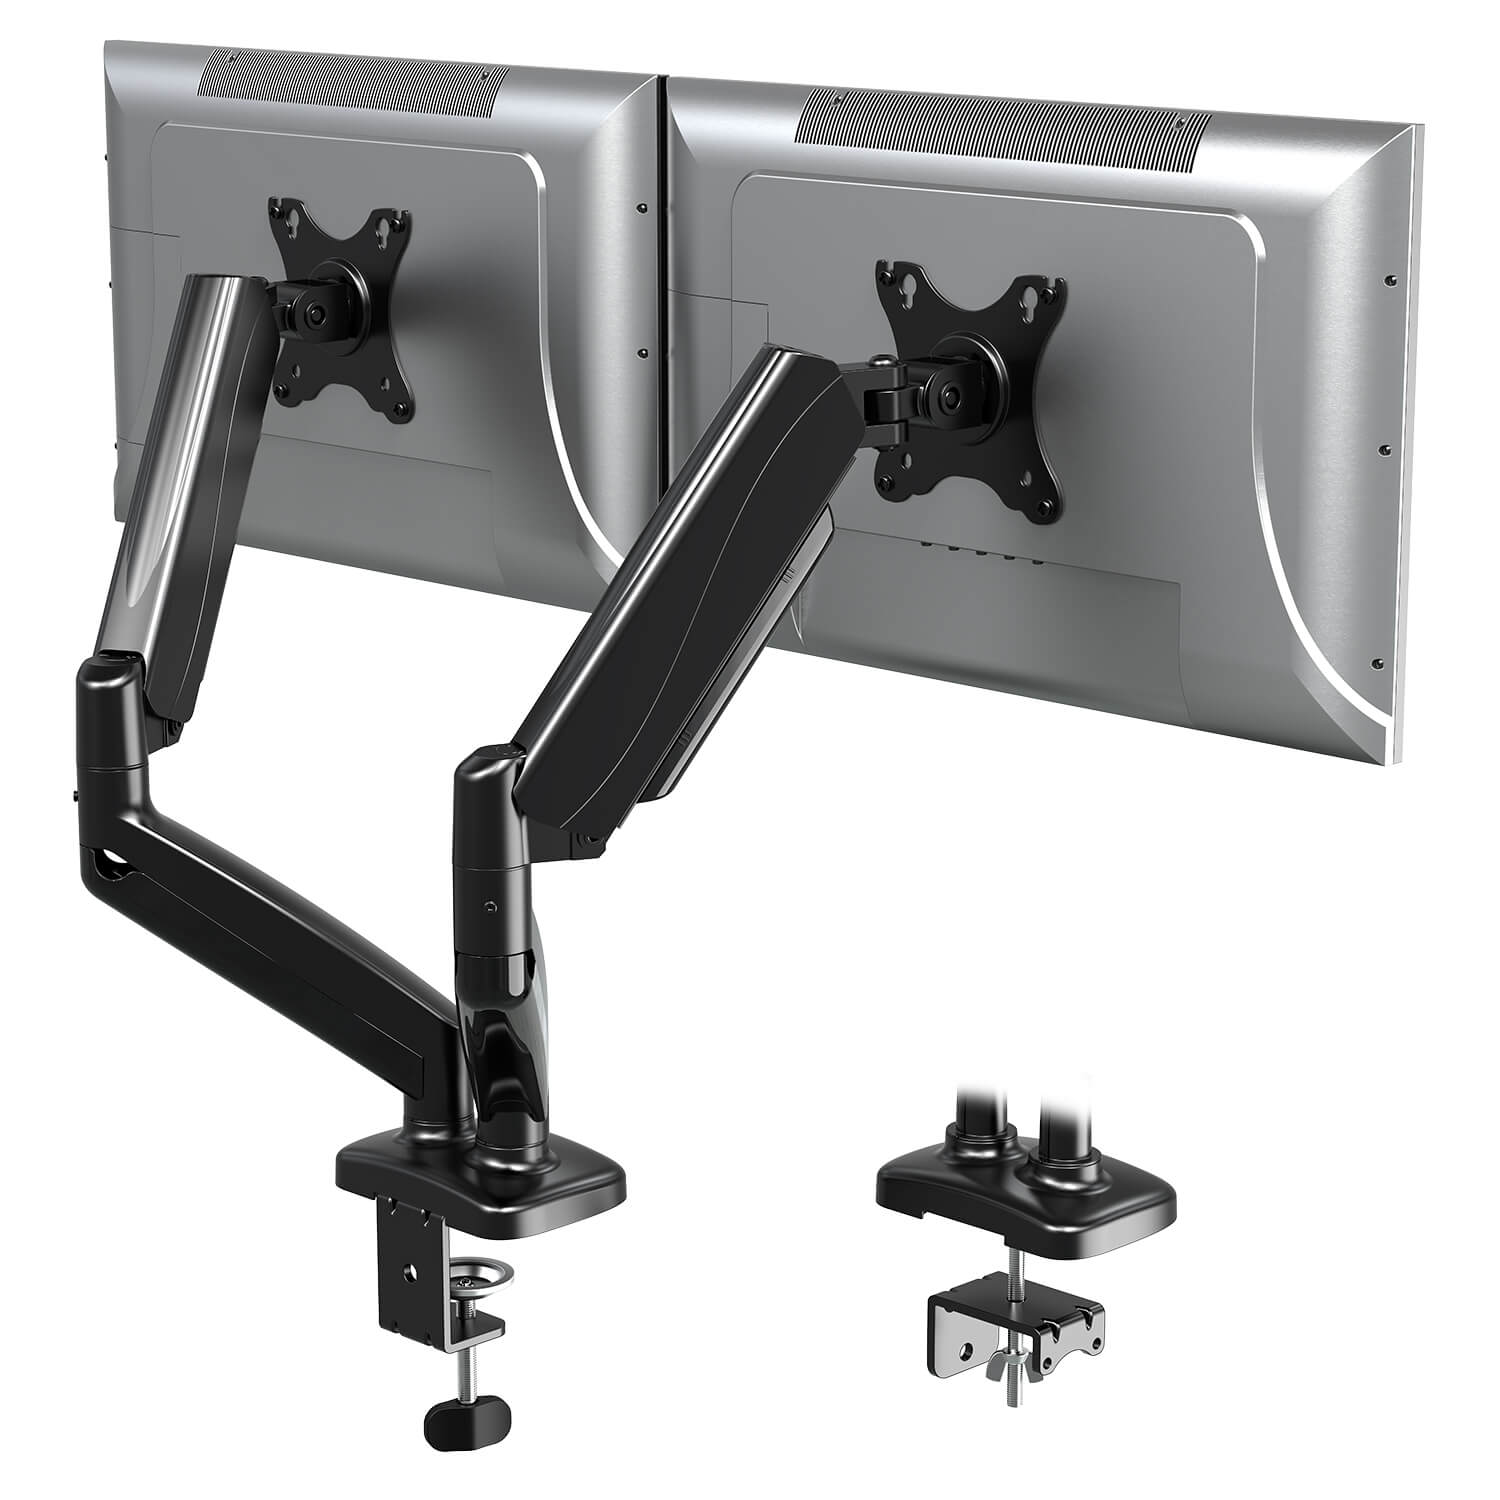 MOUNTUP Dual Monitor Mount for Desk with Gas Spring Arm for 13-32 Inch